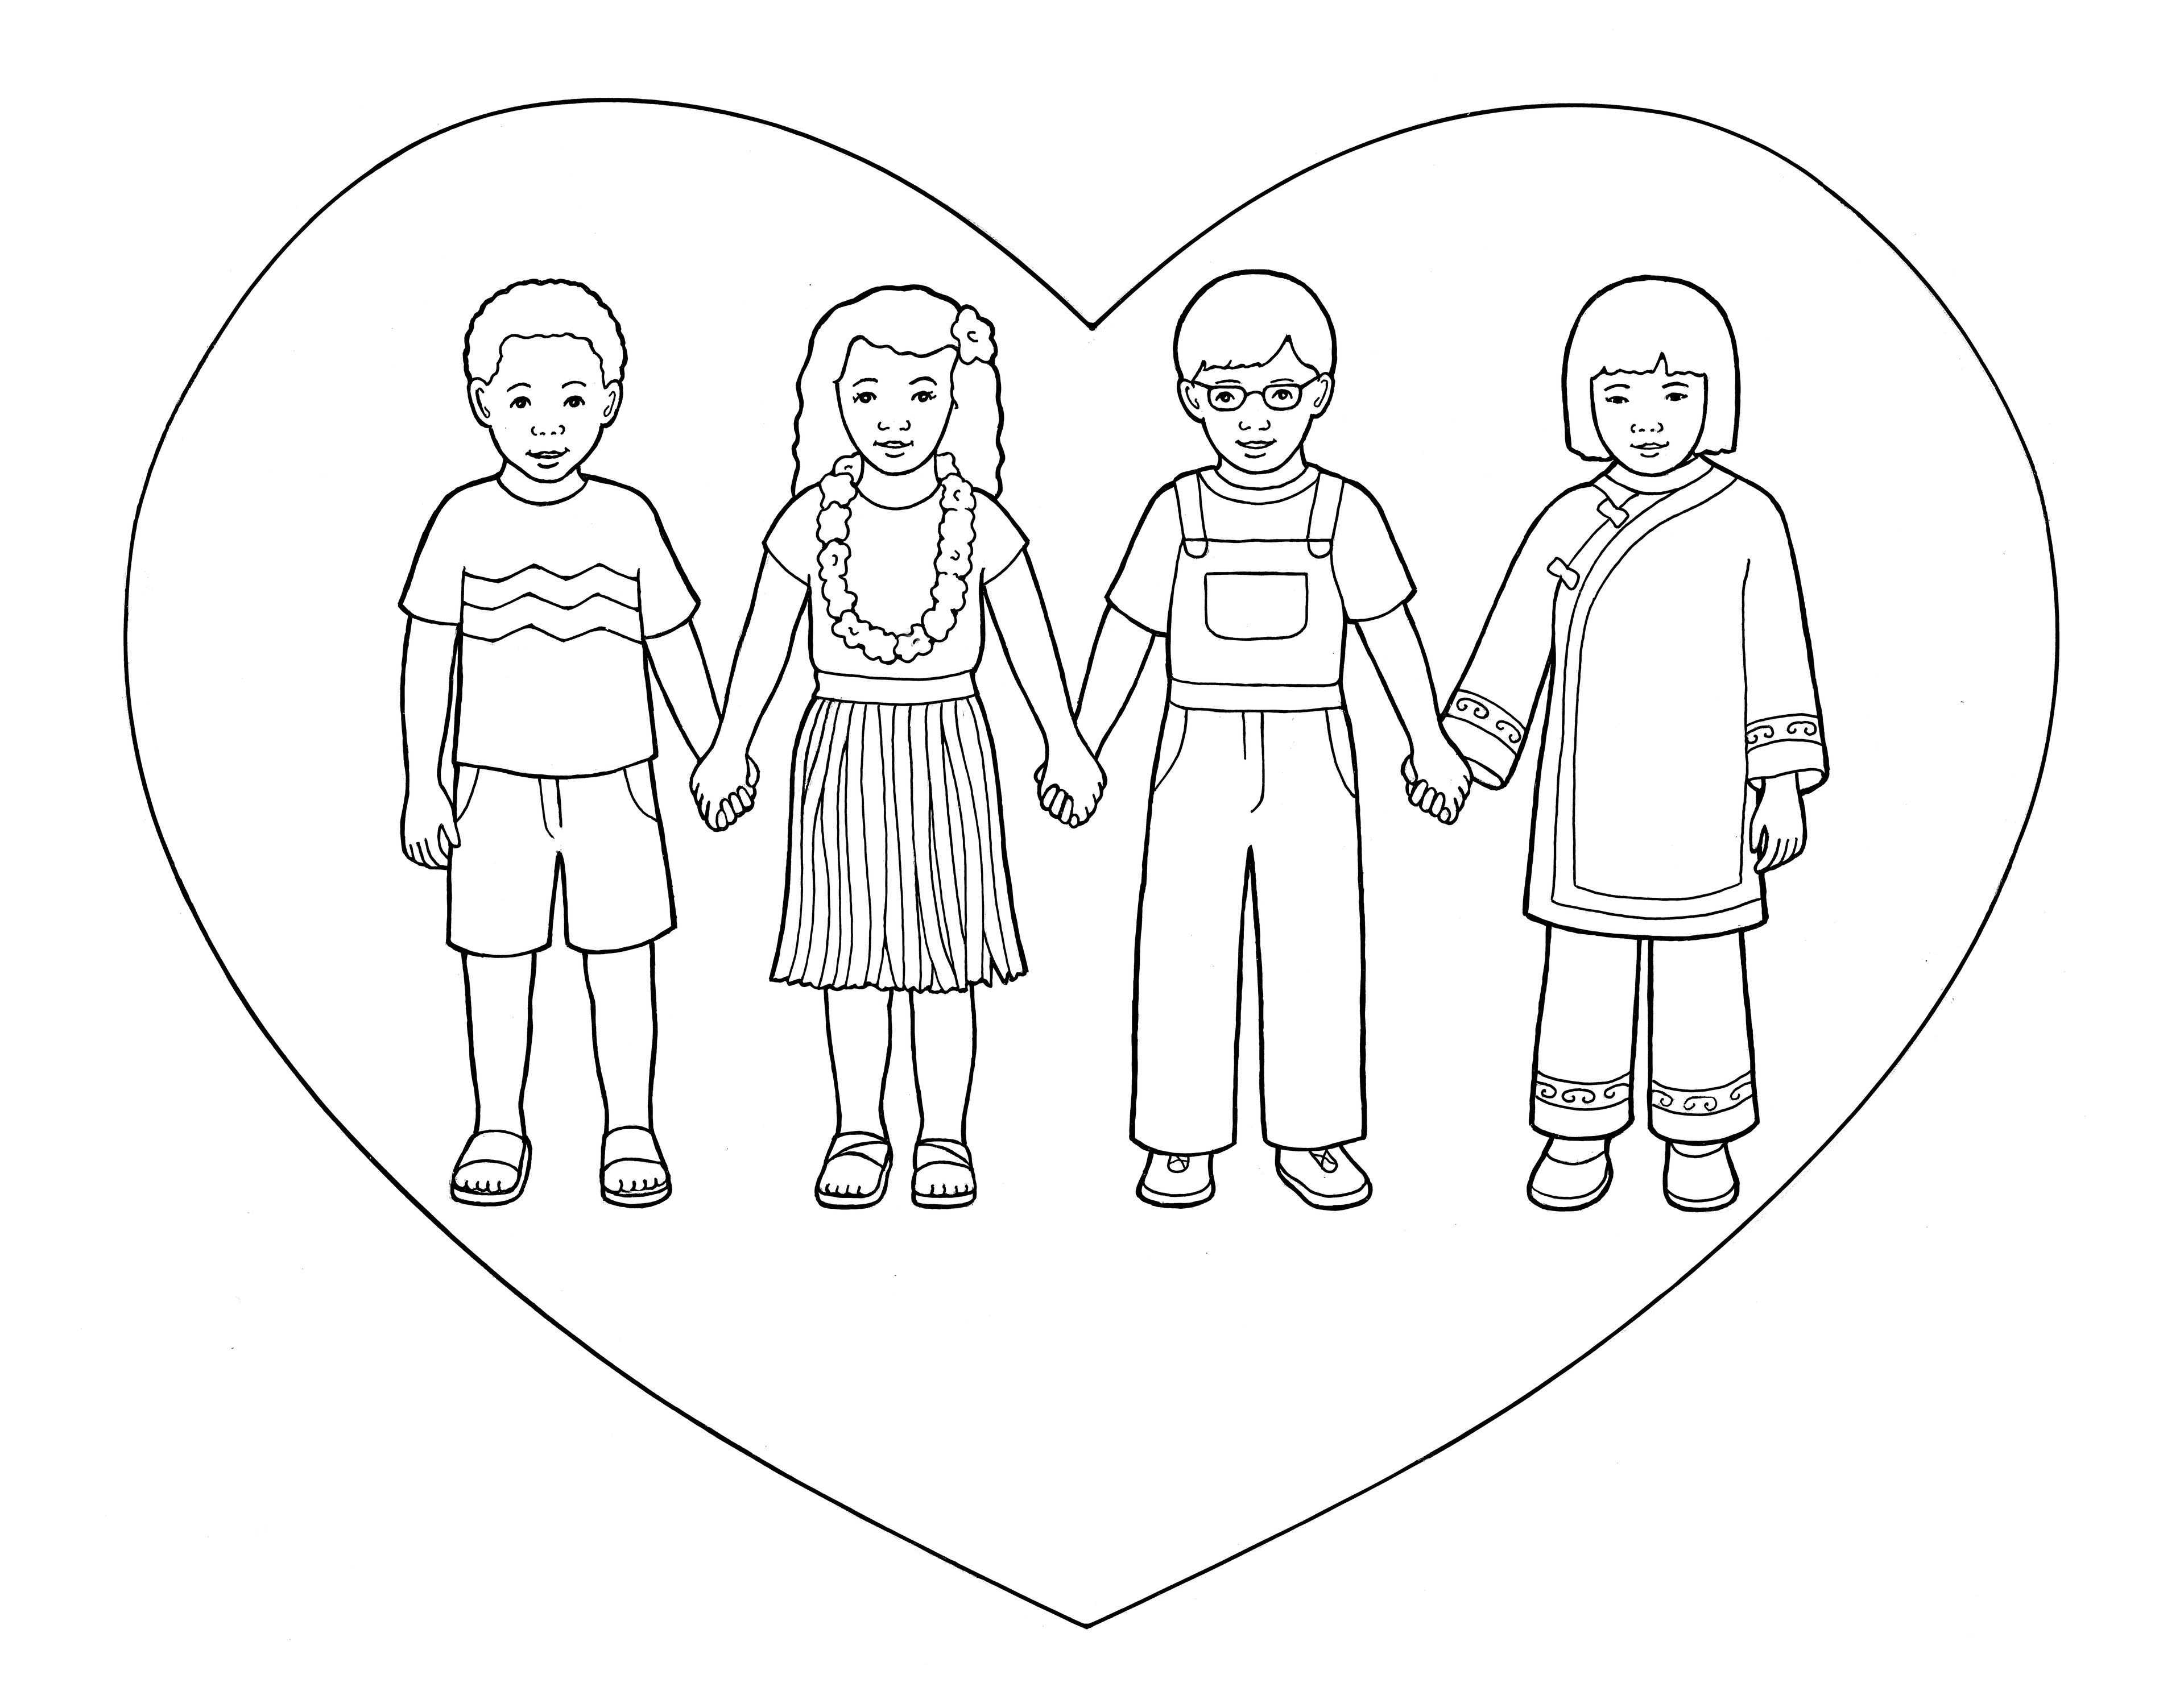 An illustration of children holding hands inside a heart, from the nursery manual Behold Your Little Ones (2008), page 79.